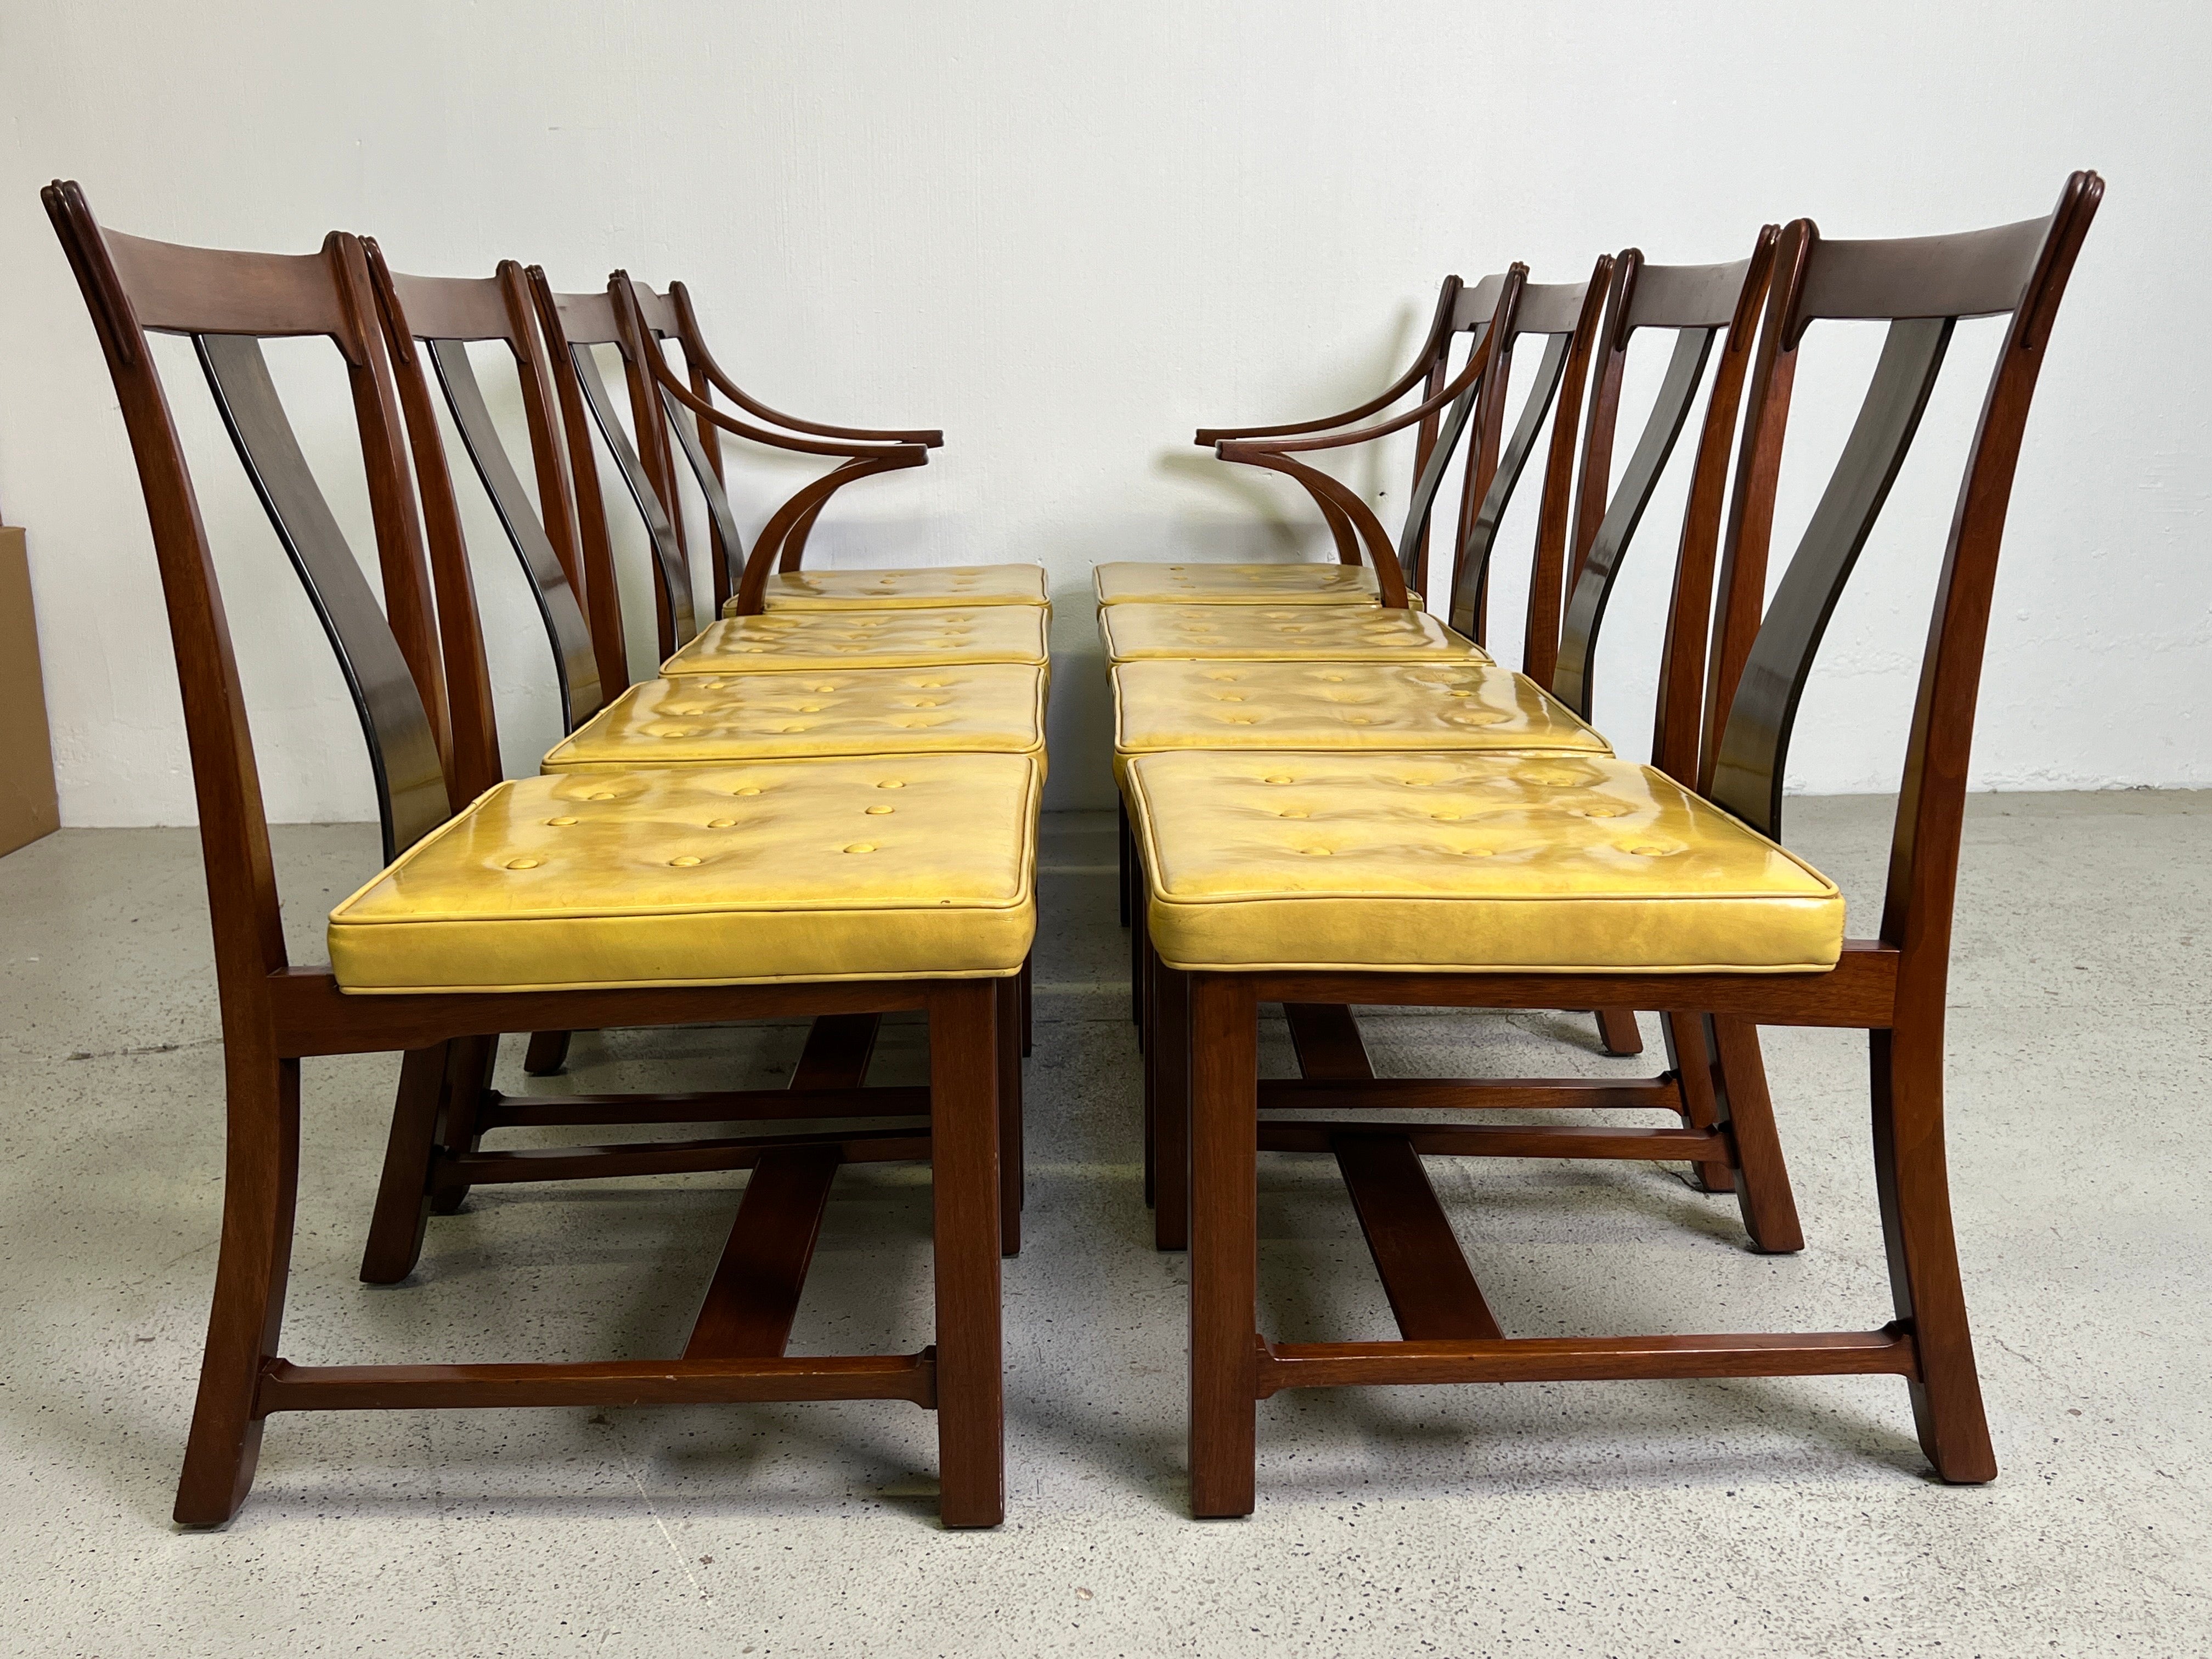 A rare set of eight dining chairs designed by Edward Wormley for Dunbar. Known as the Greene & Greene chair for it's crafted look with exposed tenon crest rail, rosewood bowed center splat and solid walnut construction. These chairs were only in